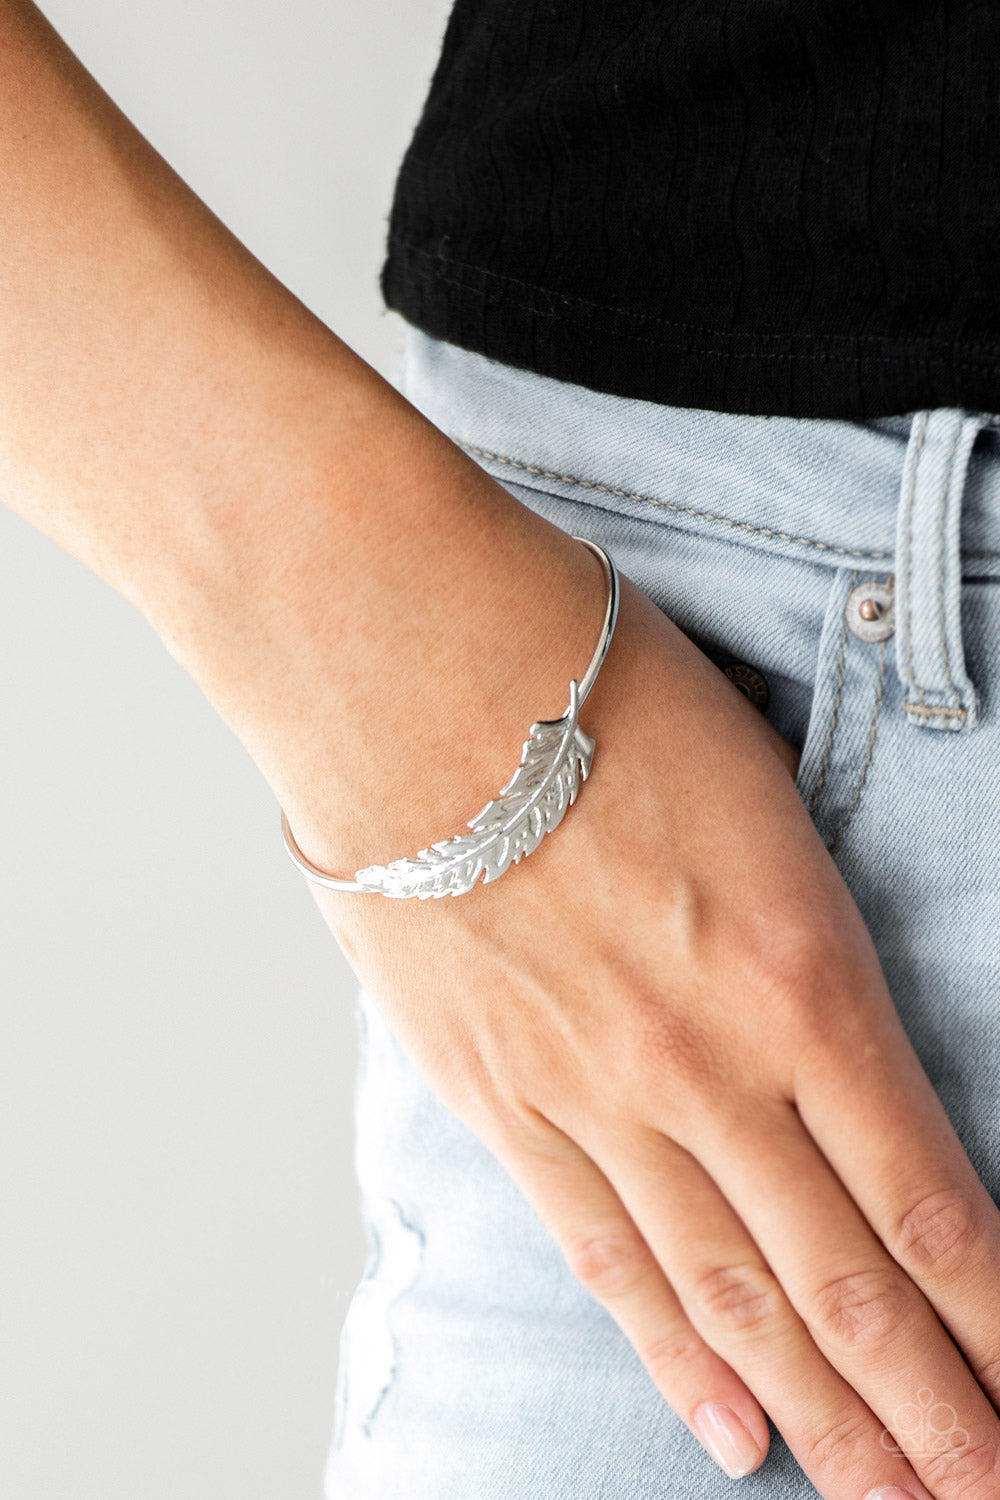 Paparazzi Bracelets - How Do You Like This FEATHER? - Silver